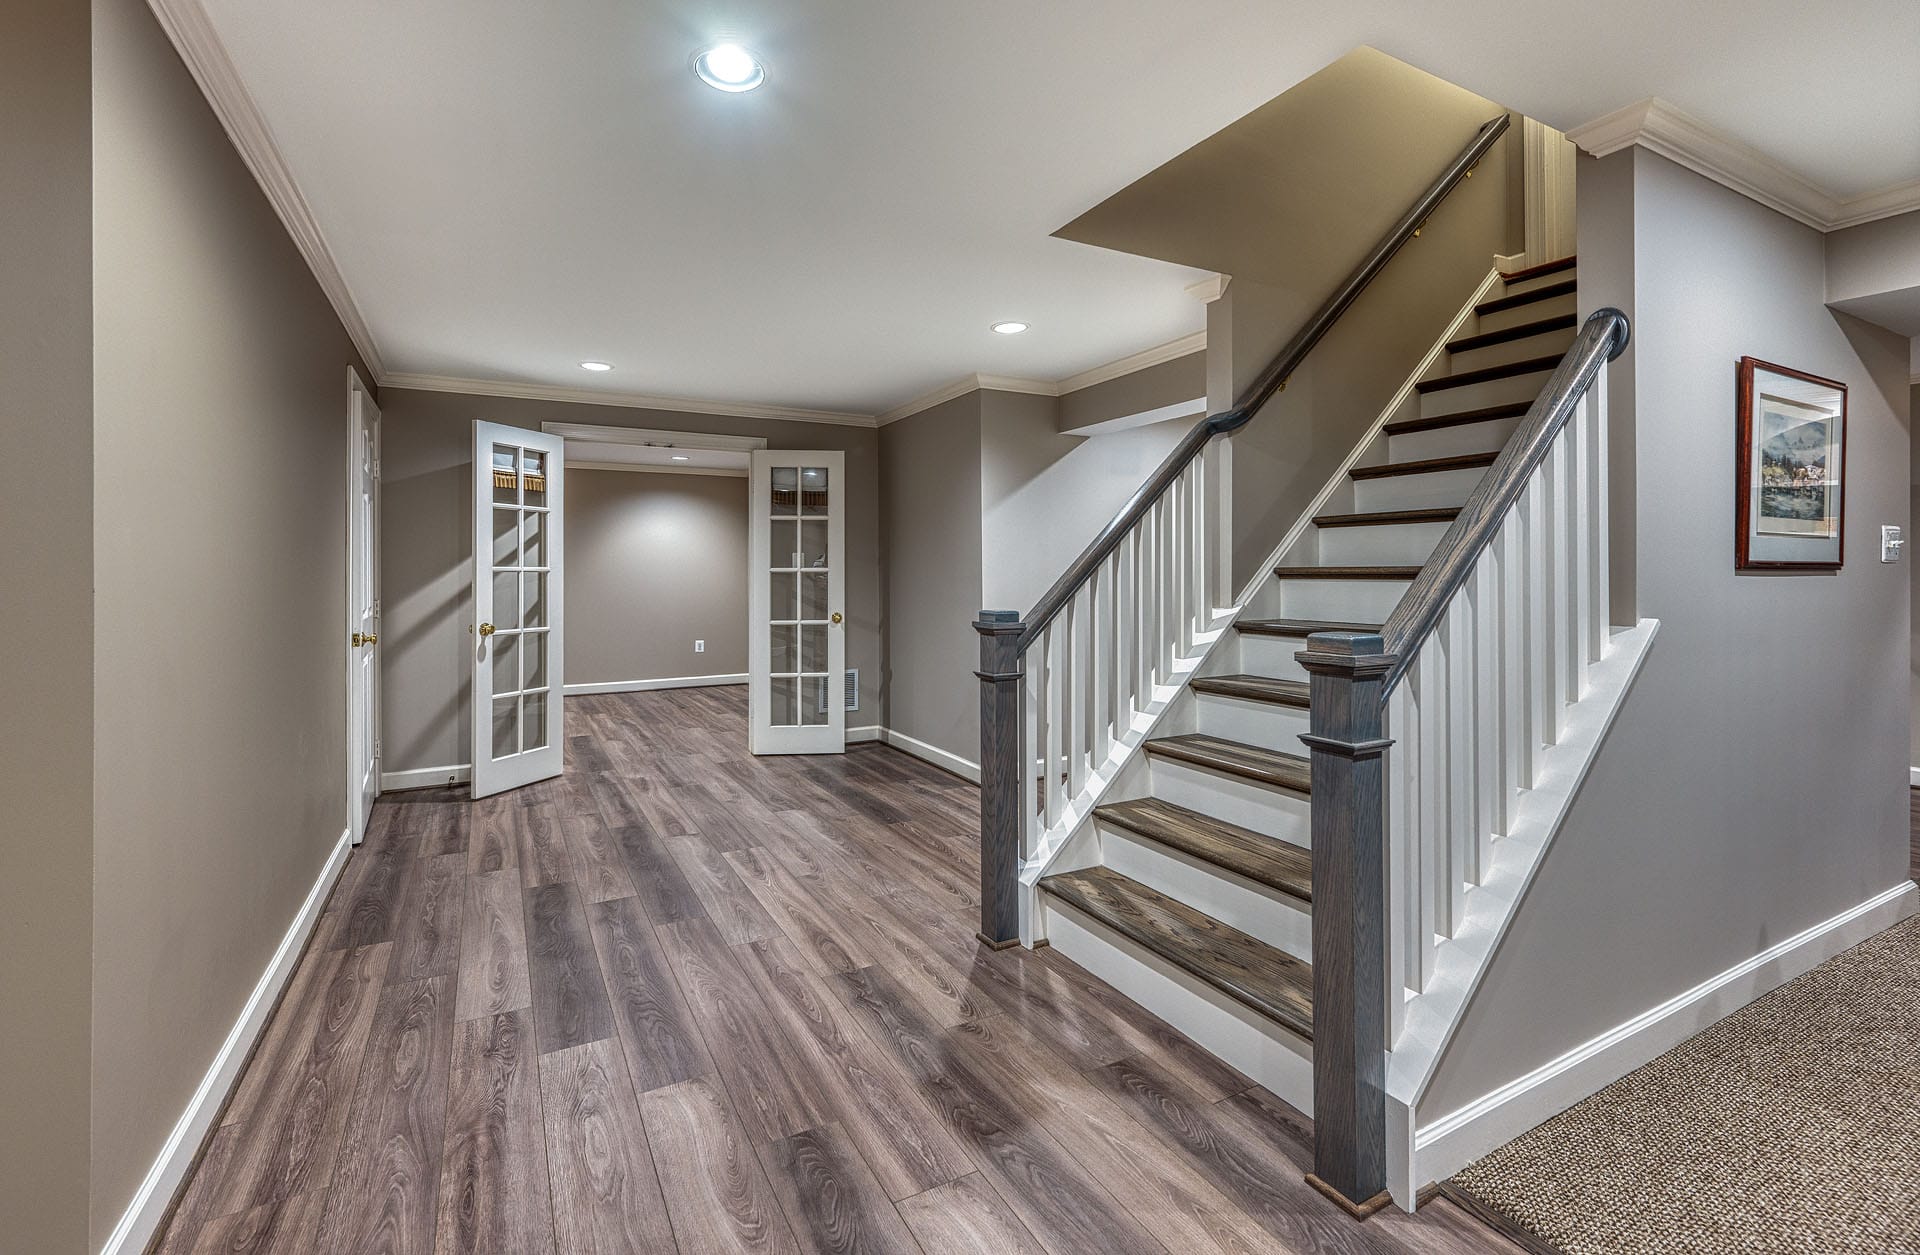 Basement remodeling Springfield, VA featuring new flooring, stair treads, rails and doors